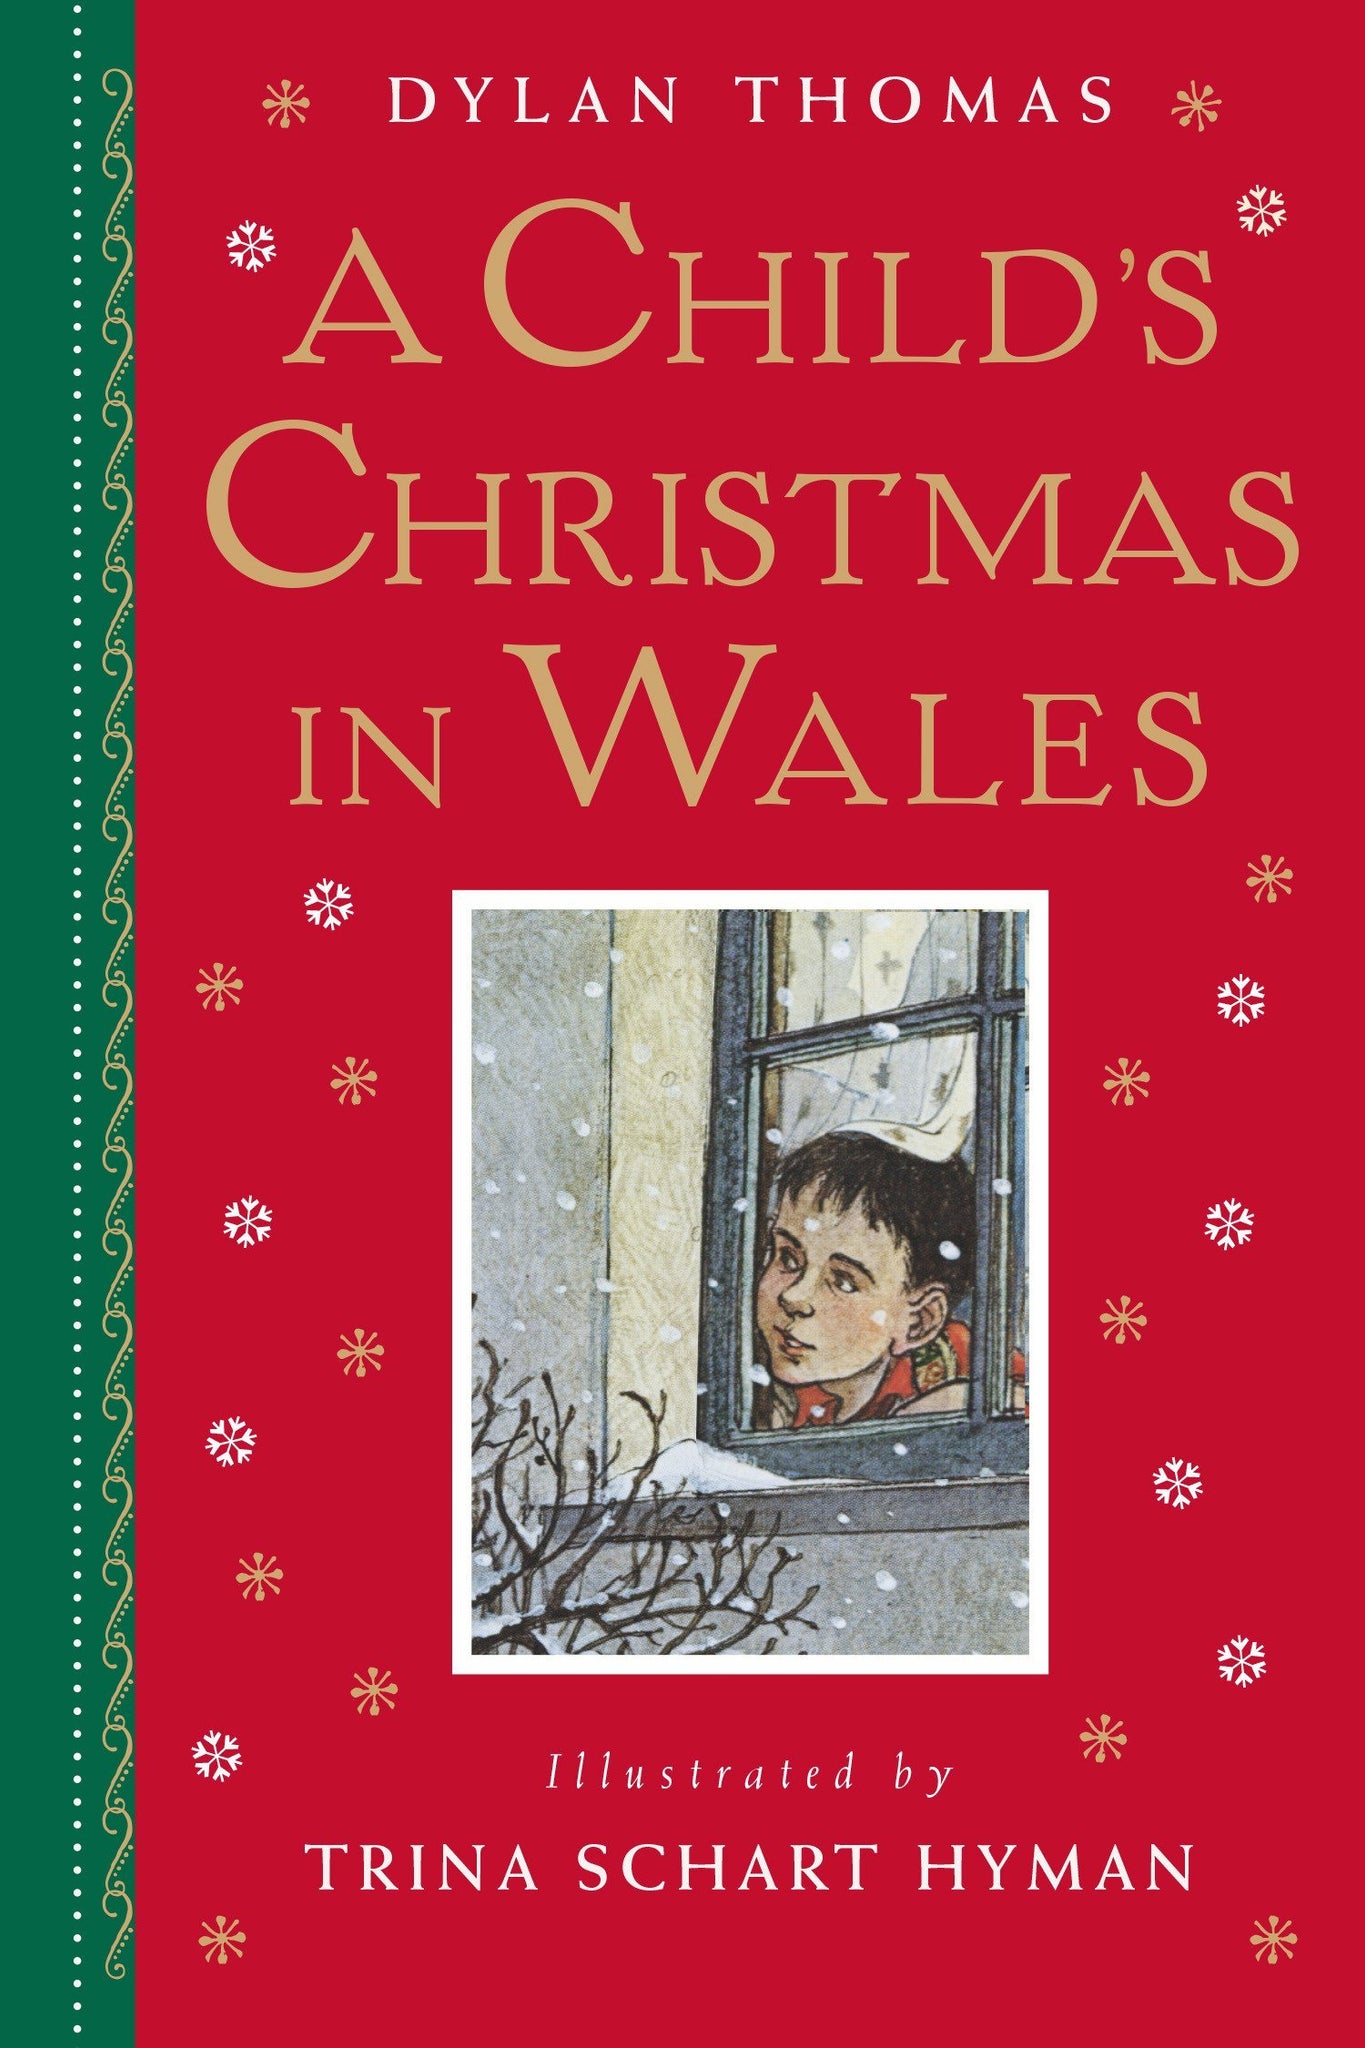 A Child's Christmas in Wales : Gift Edition by Dylan Thomas